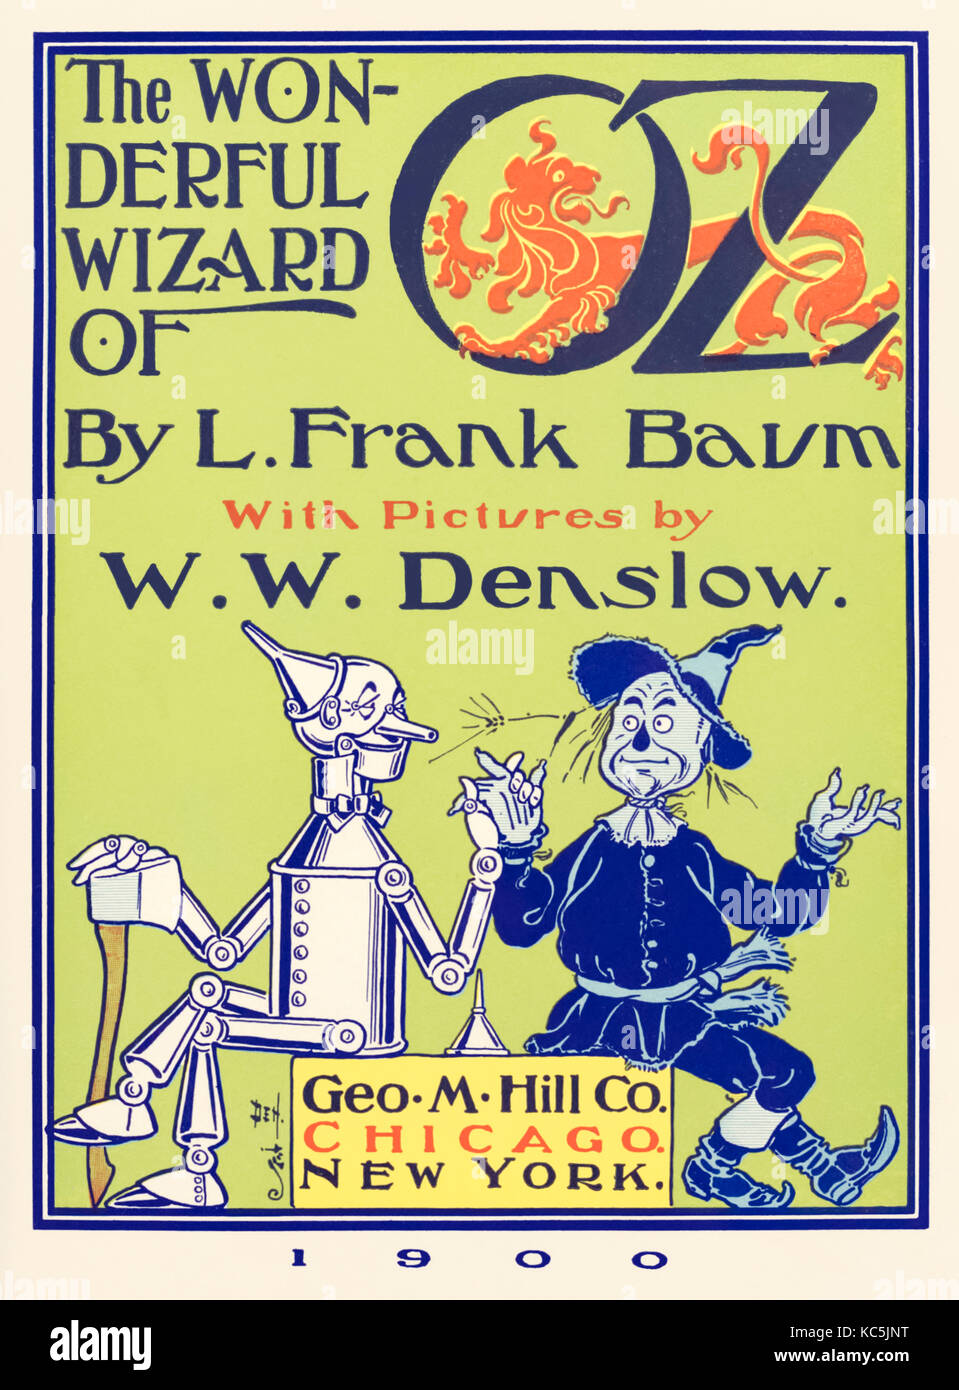 Title page from ‘The Wonderful Wizard of Oz’ by L. Frank Baum (1856-1919) with pictures by W. W. Denslow (1856-1915), featuring the tin man and the scarecrow. Full set of full page images from first edition to follow in Oct 2017. See more information below. Stock Photo